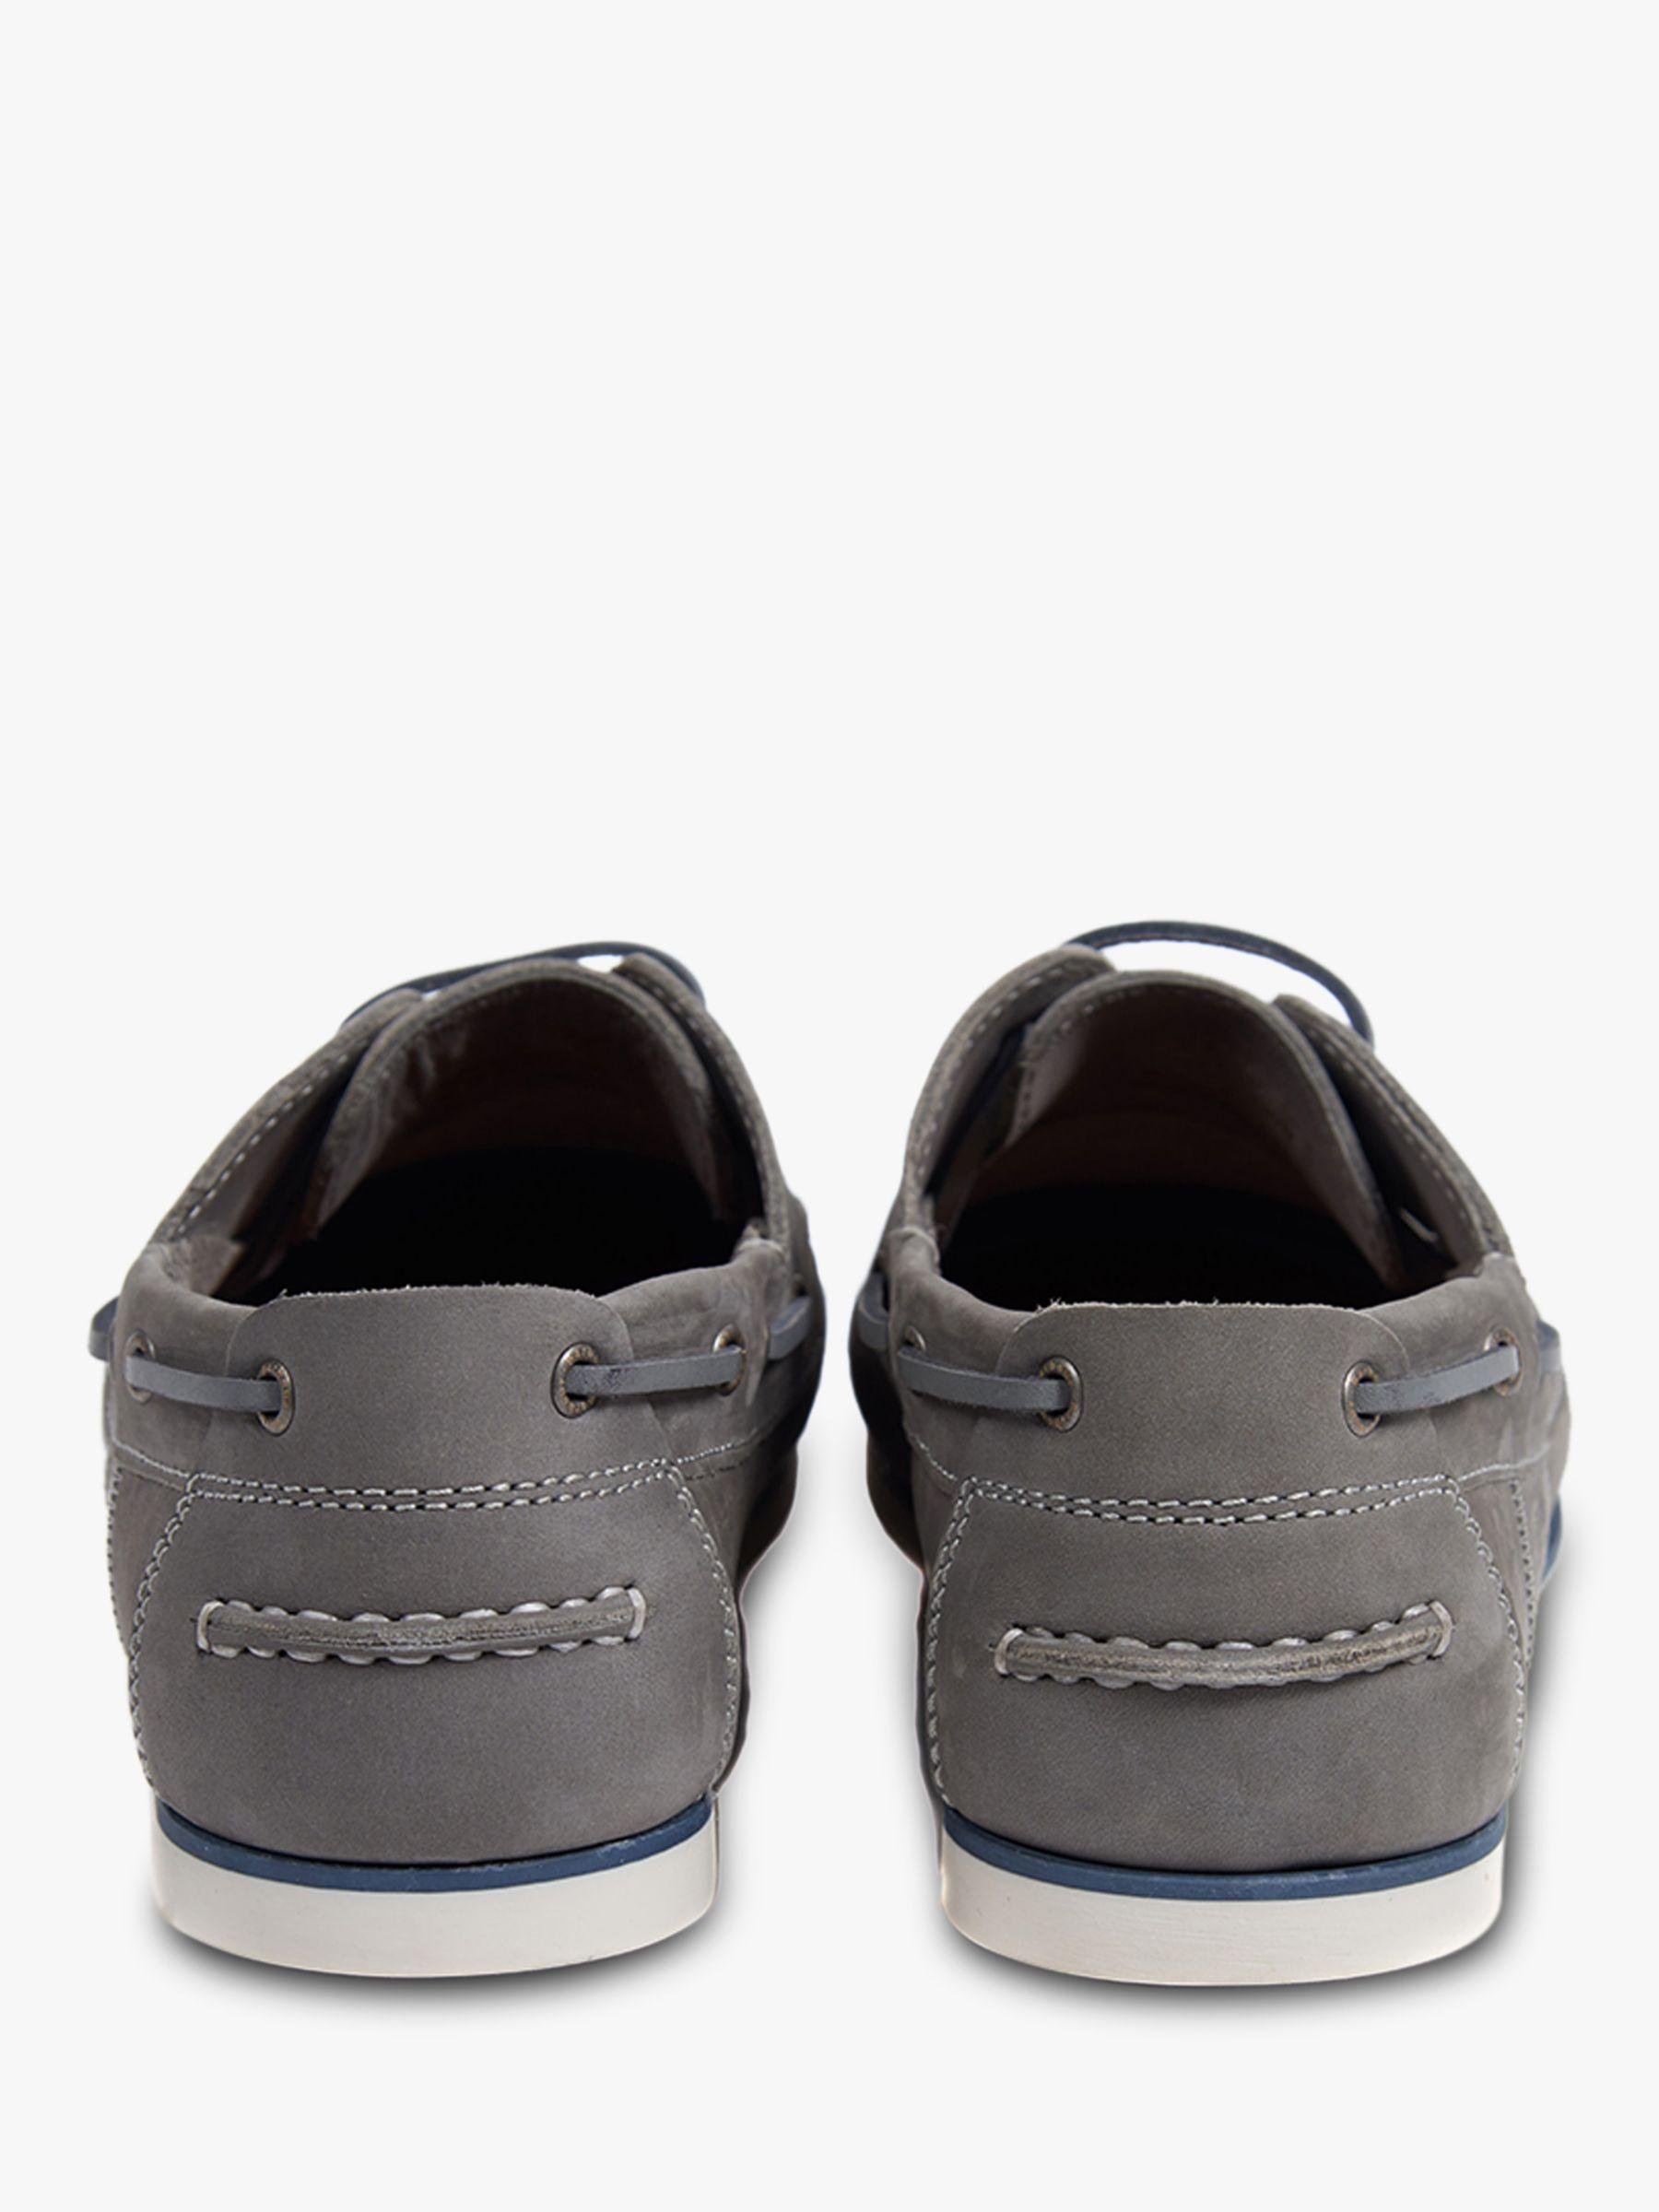 barbour capstan boat shoes grey